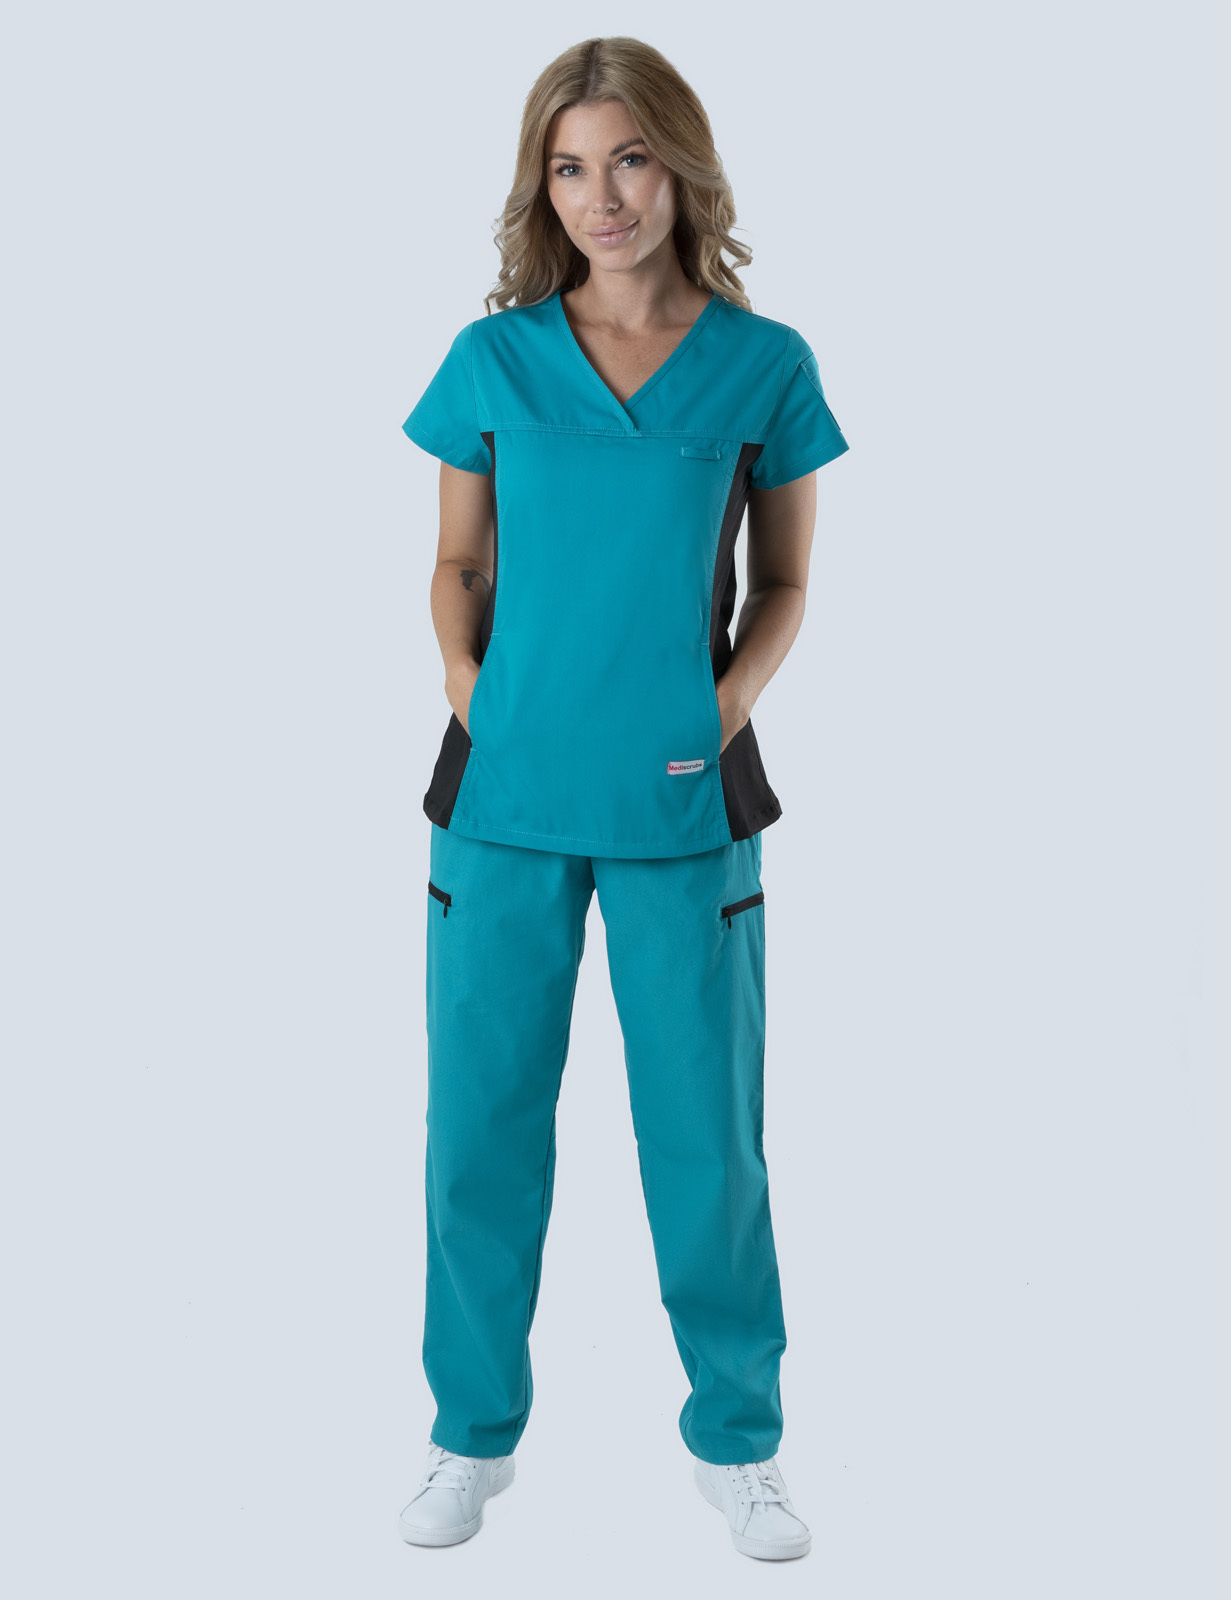 Women's Utility Pants - Teal - X Small